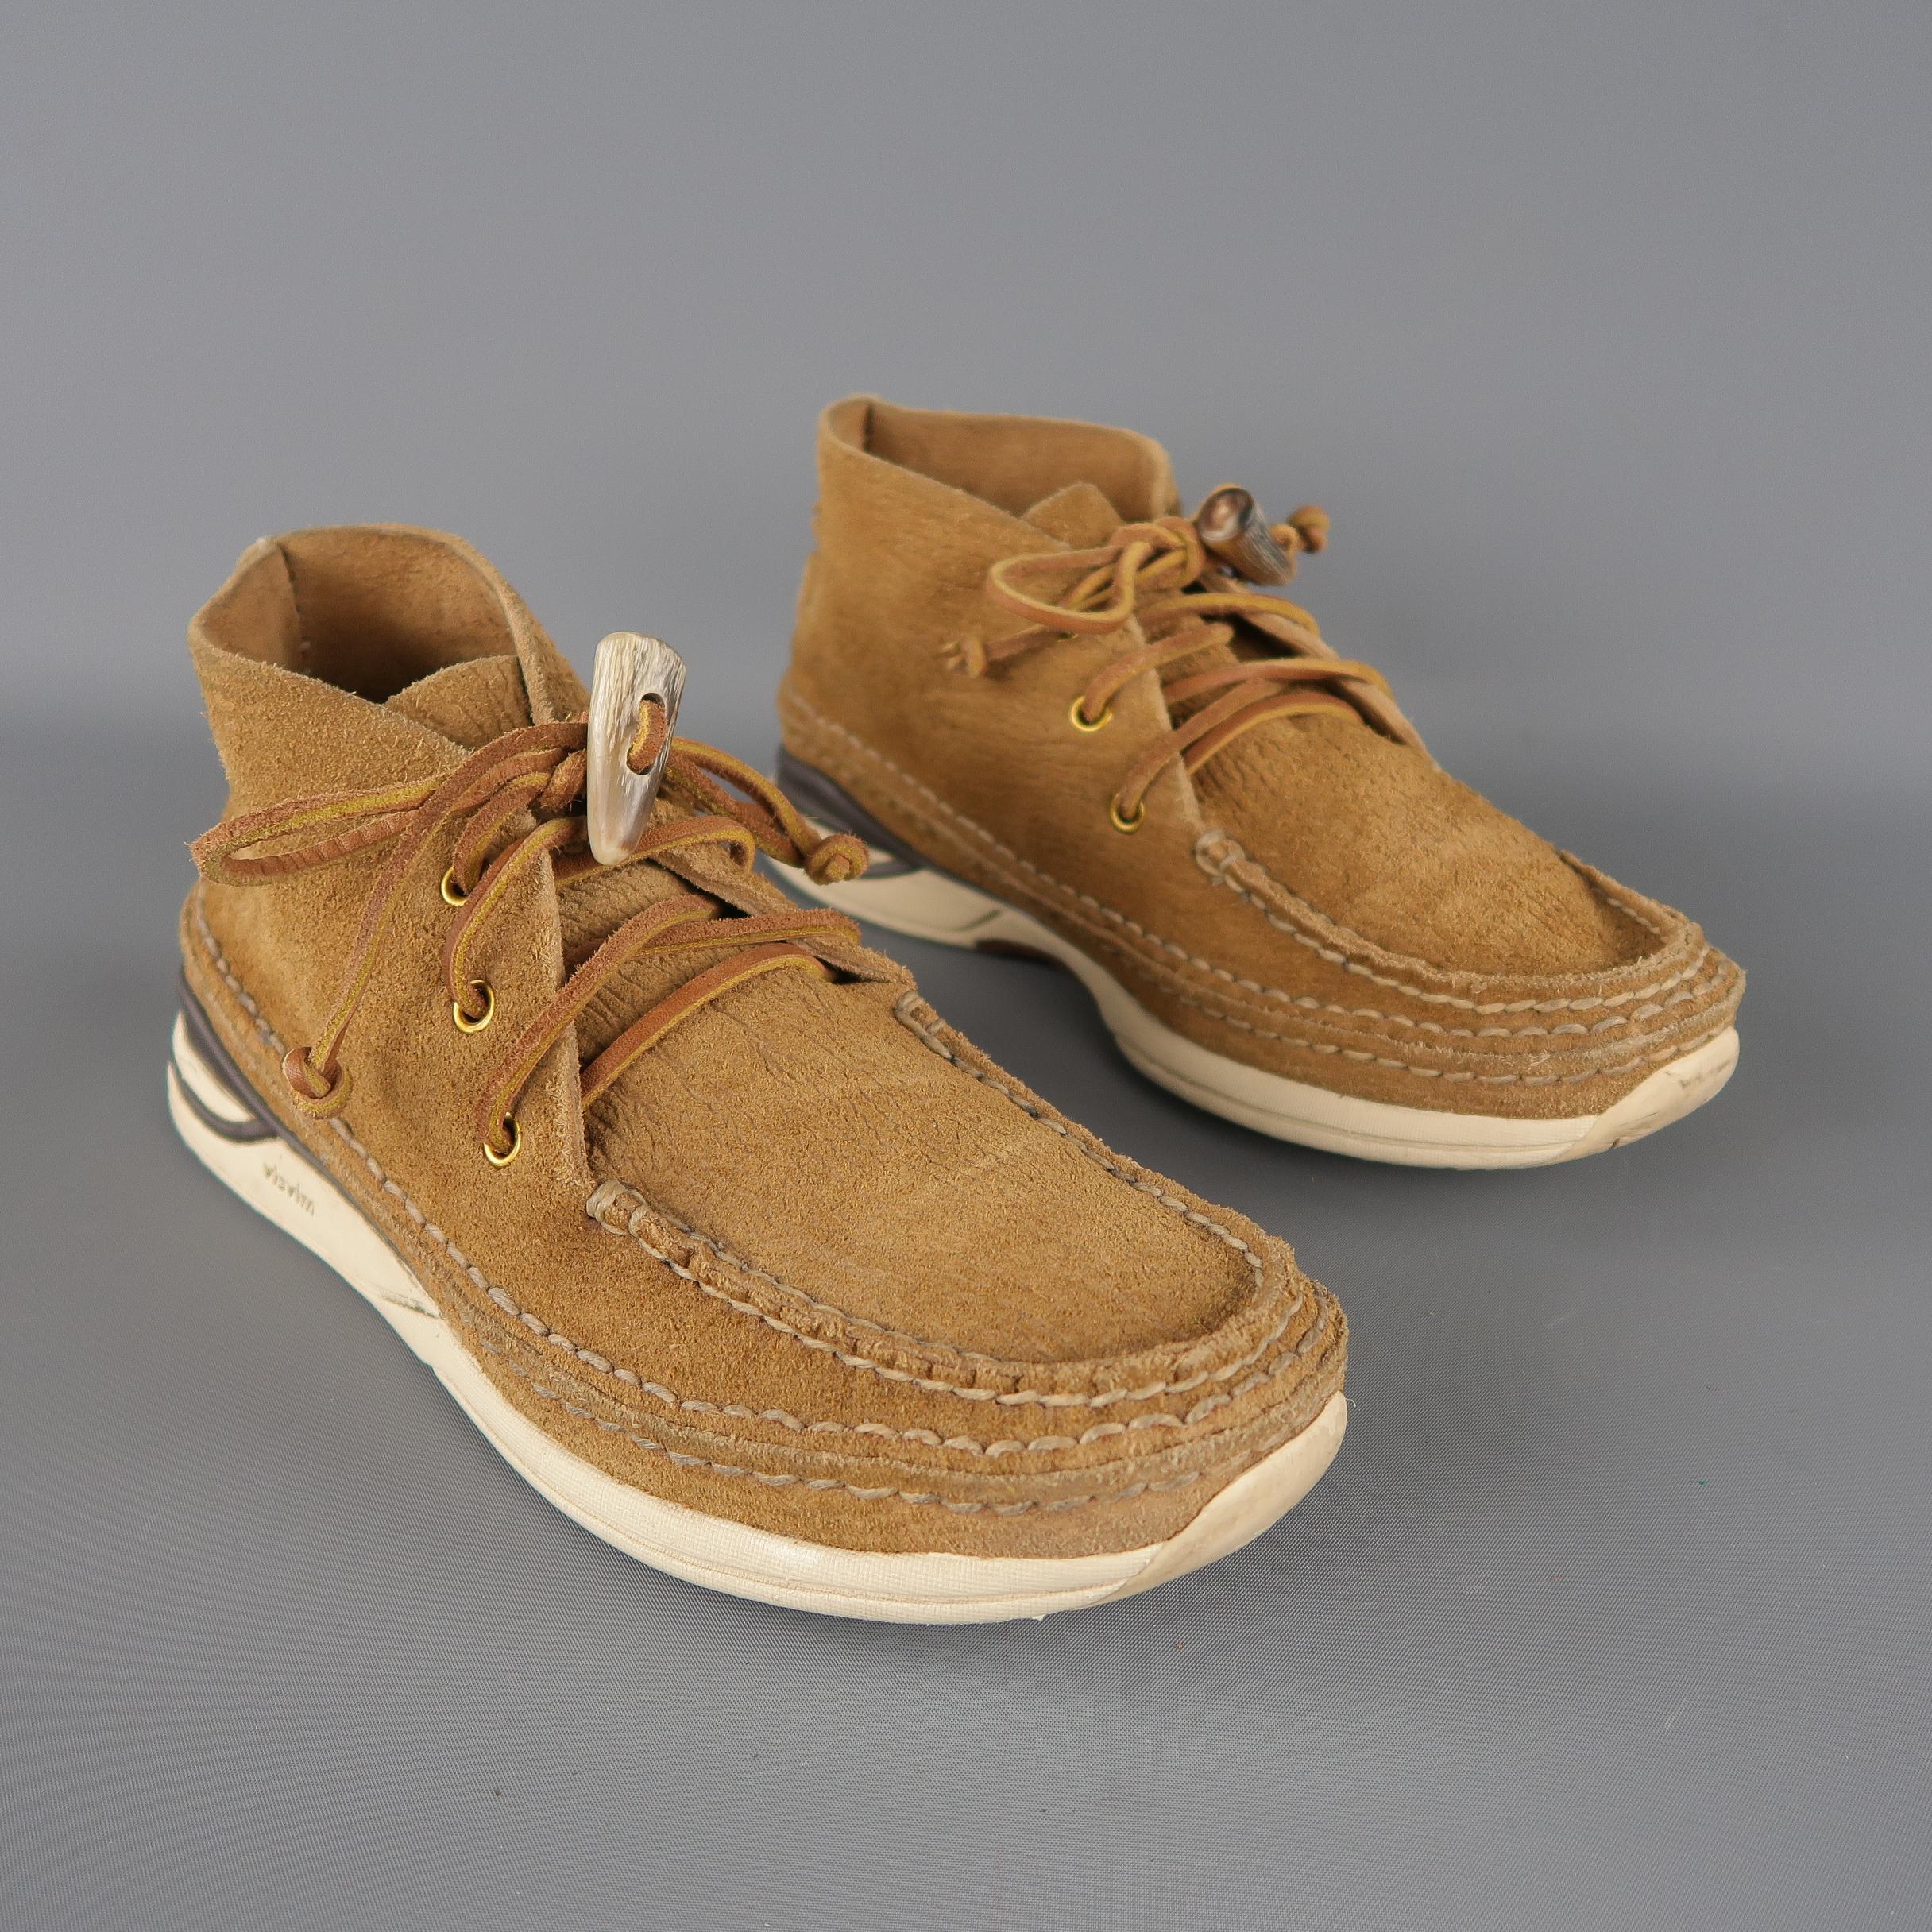 VISVIM casual chukka boots come in tan textured suede, lace up front, contrast detail on the sole and horn toggle on the closure. Minor Wear.
 
Good Pre-Owned Condition.
Marked: 9.5
 
Outsole: 12 x 3  in.